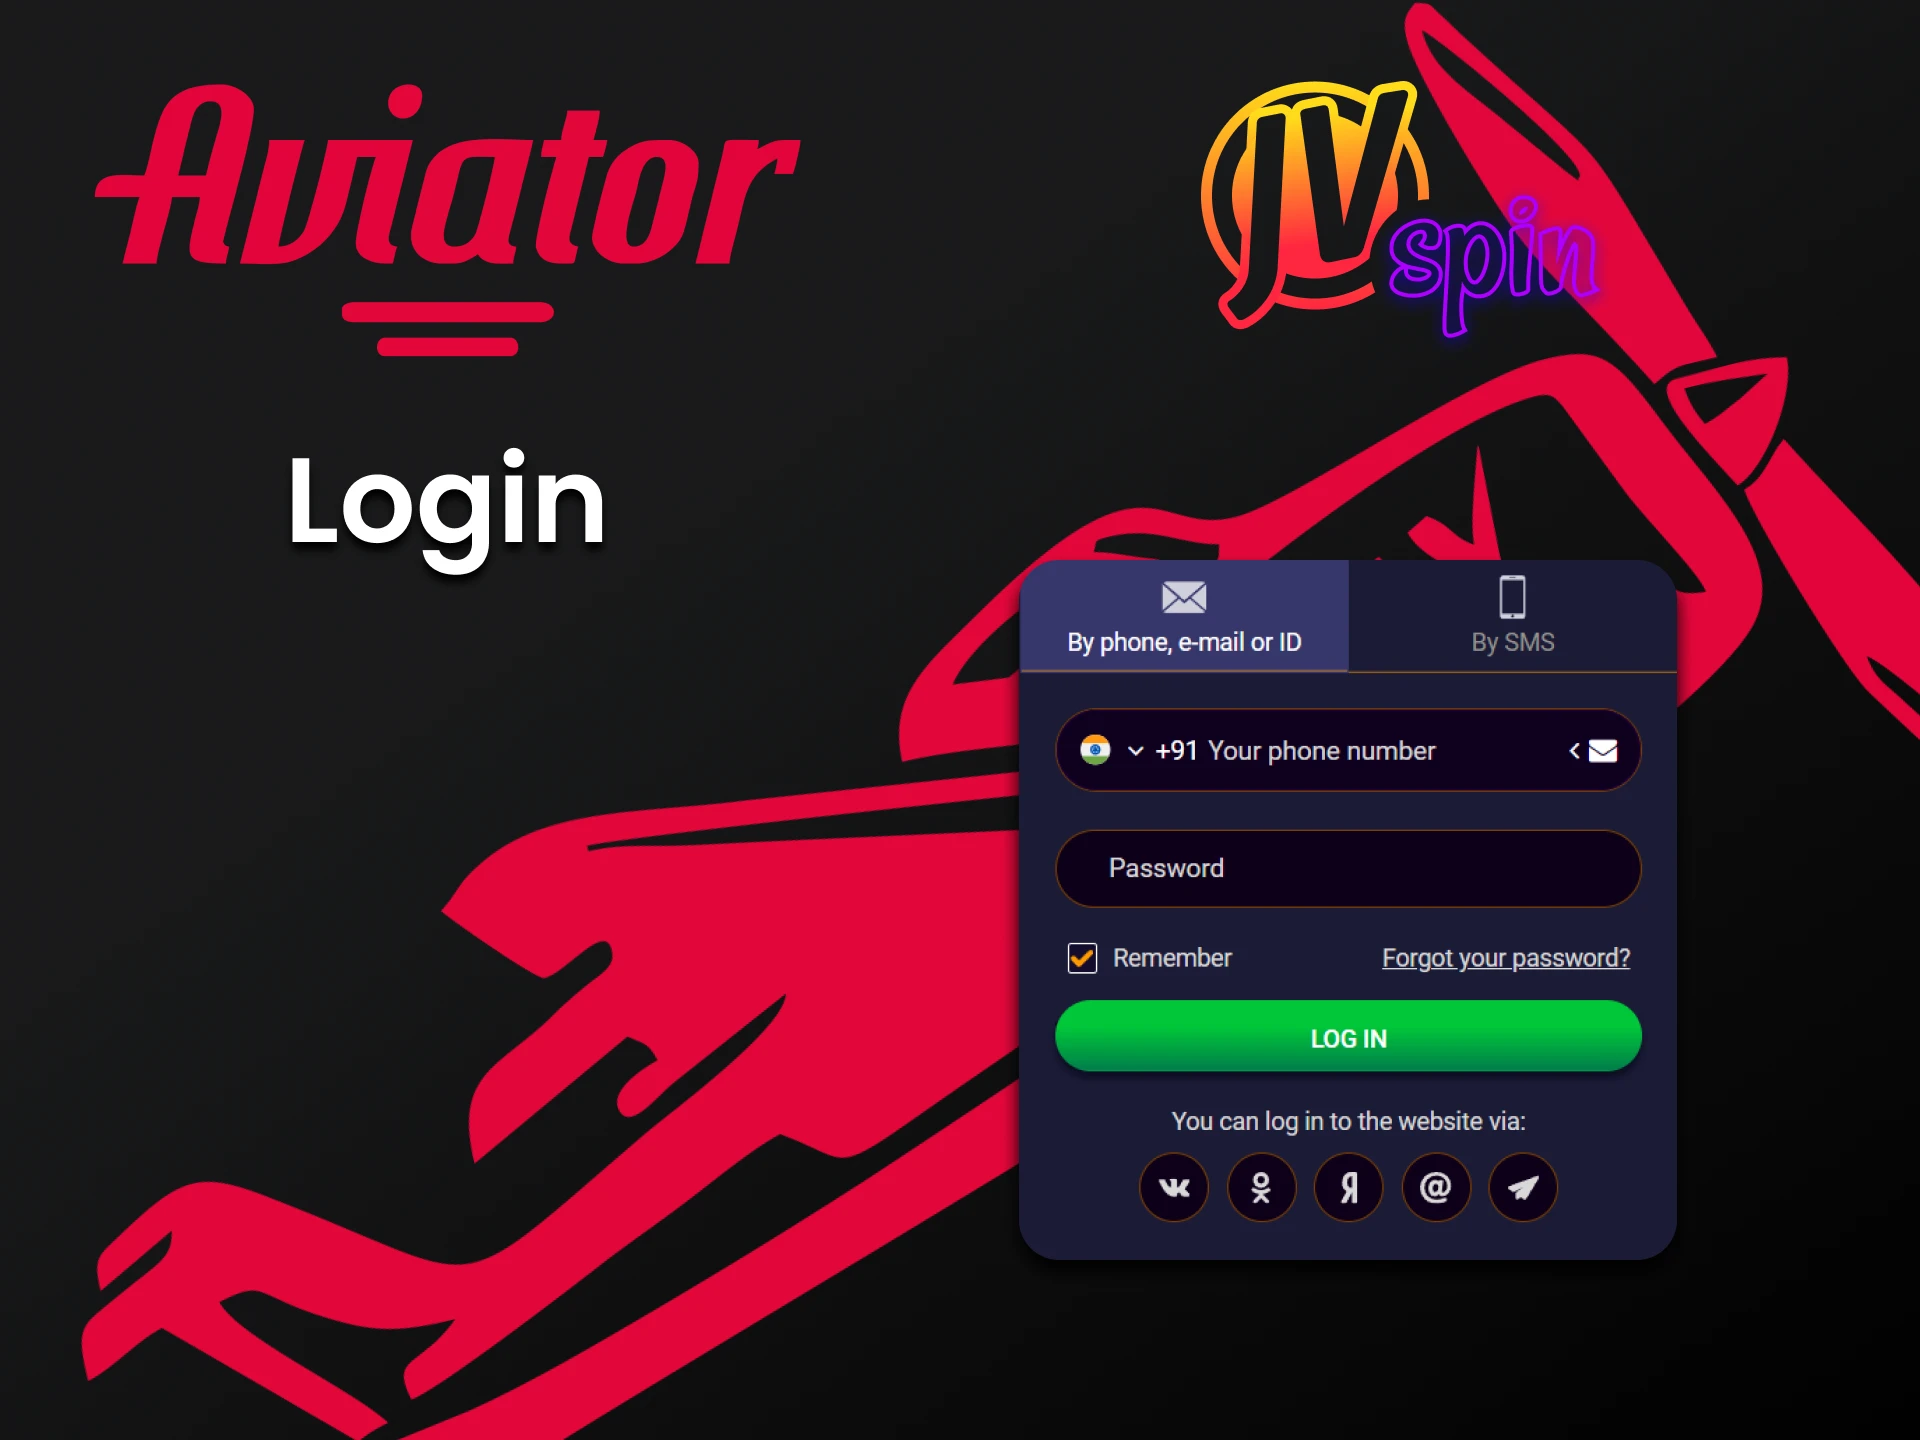 Log in to your JV Spin account to play Aviator.